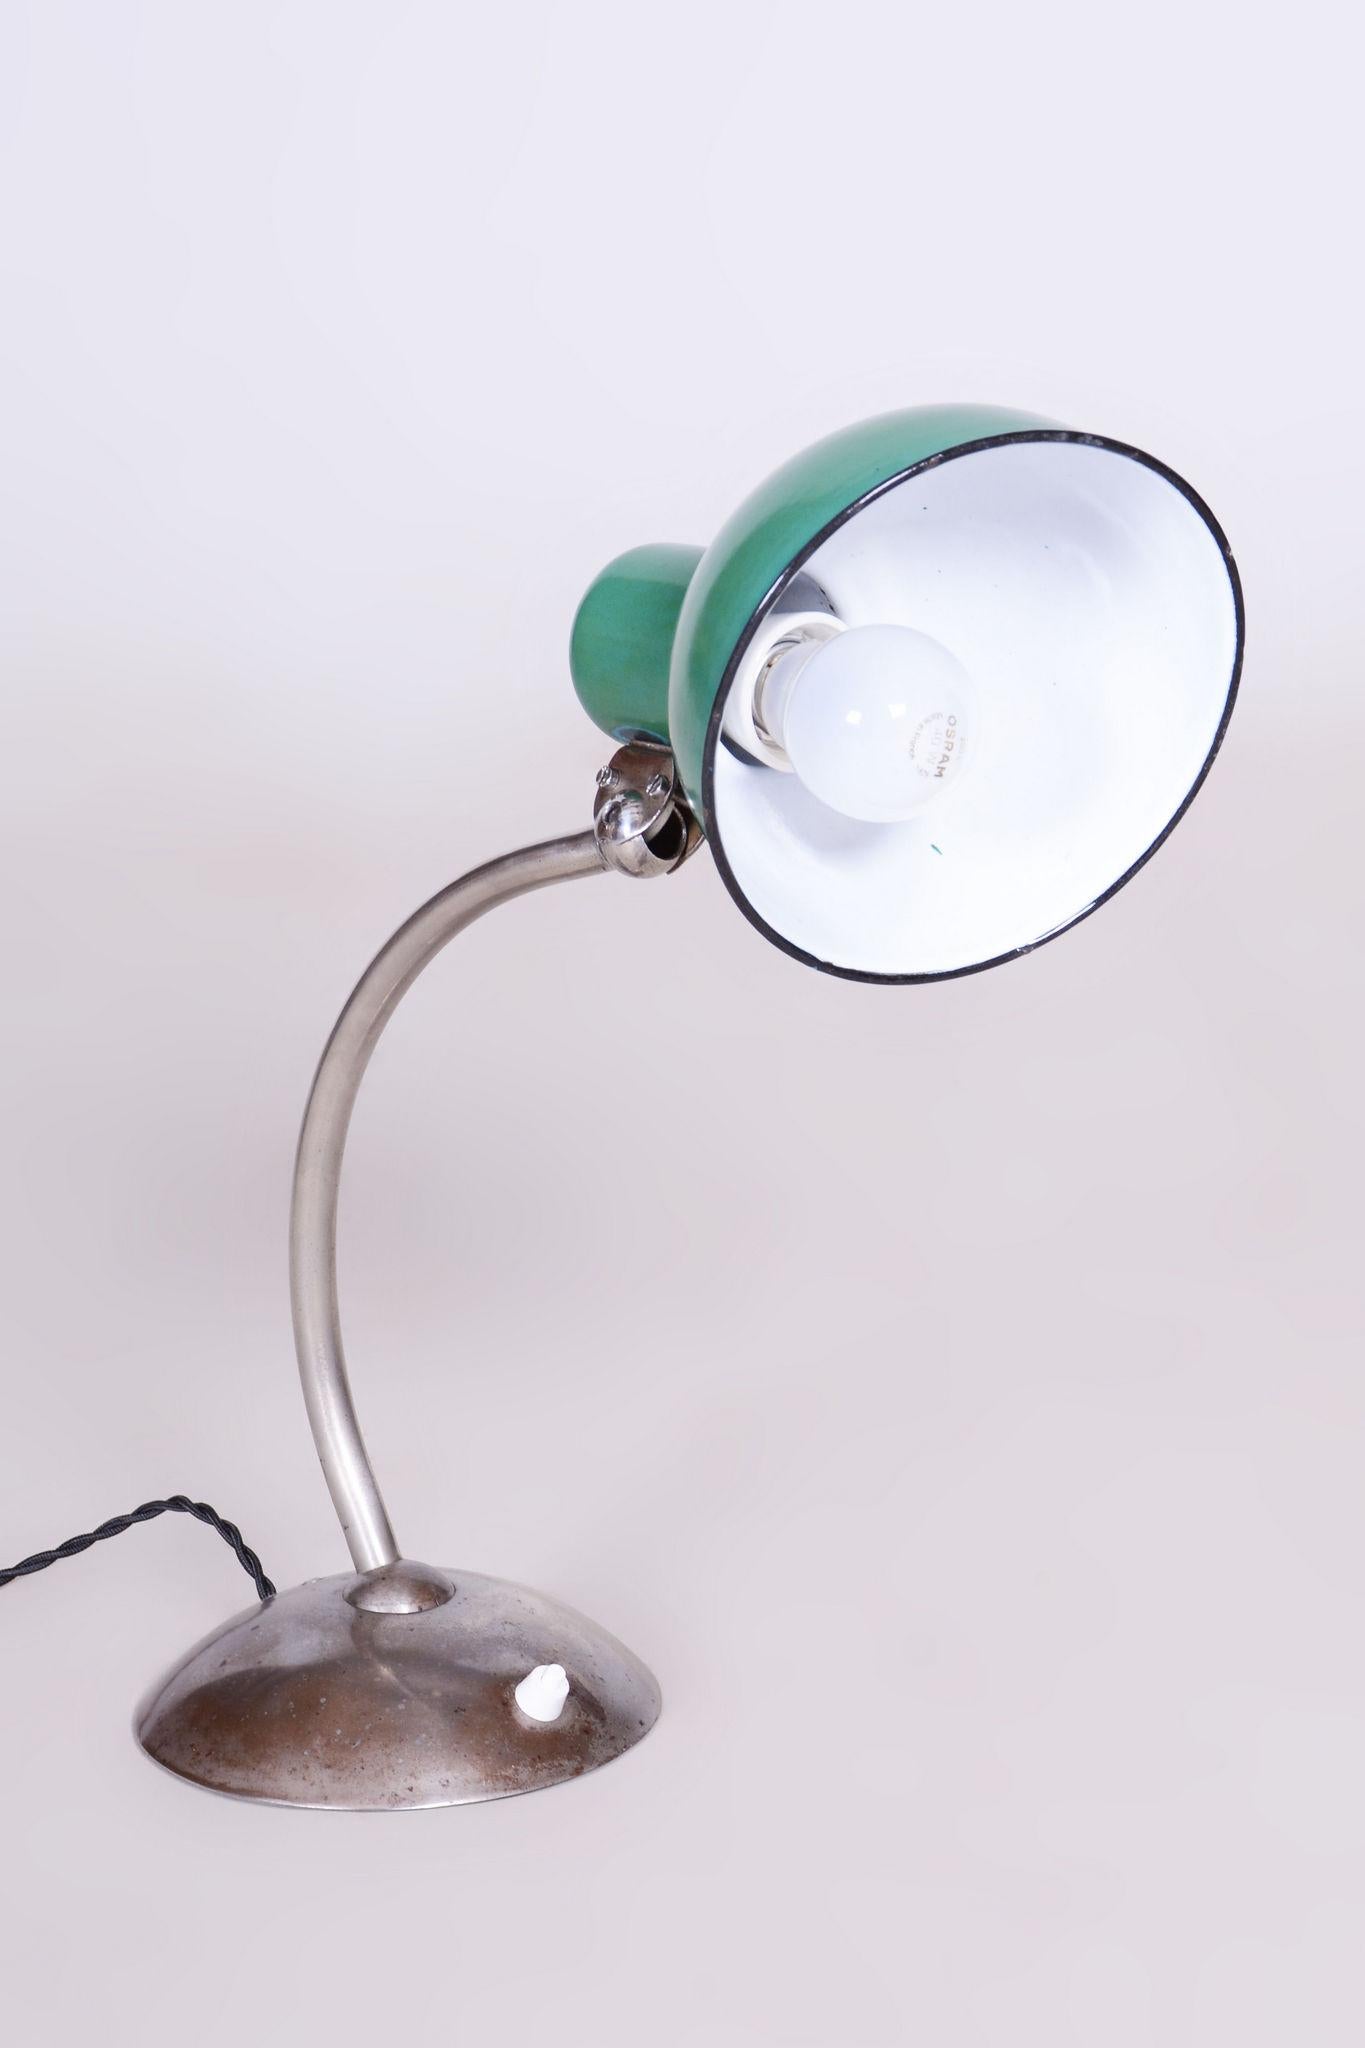 Restored Bauhaus Table Lamp, New Electrification, Chrome, Czechia, 1930s In Good Condition For Sale In Horomerice, CZ